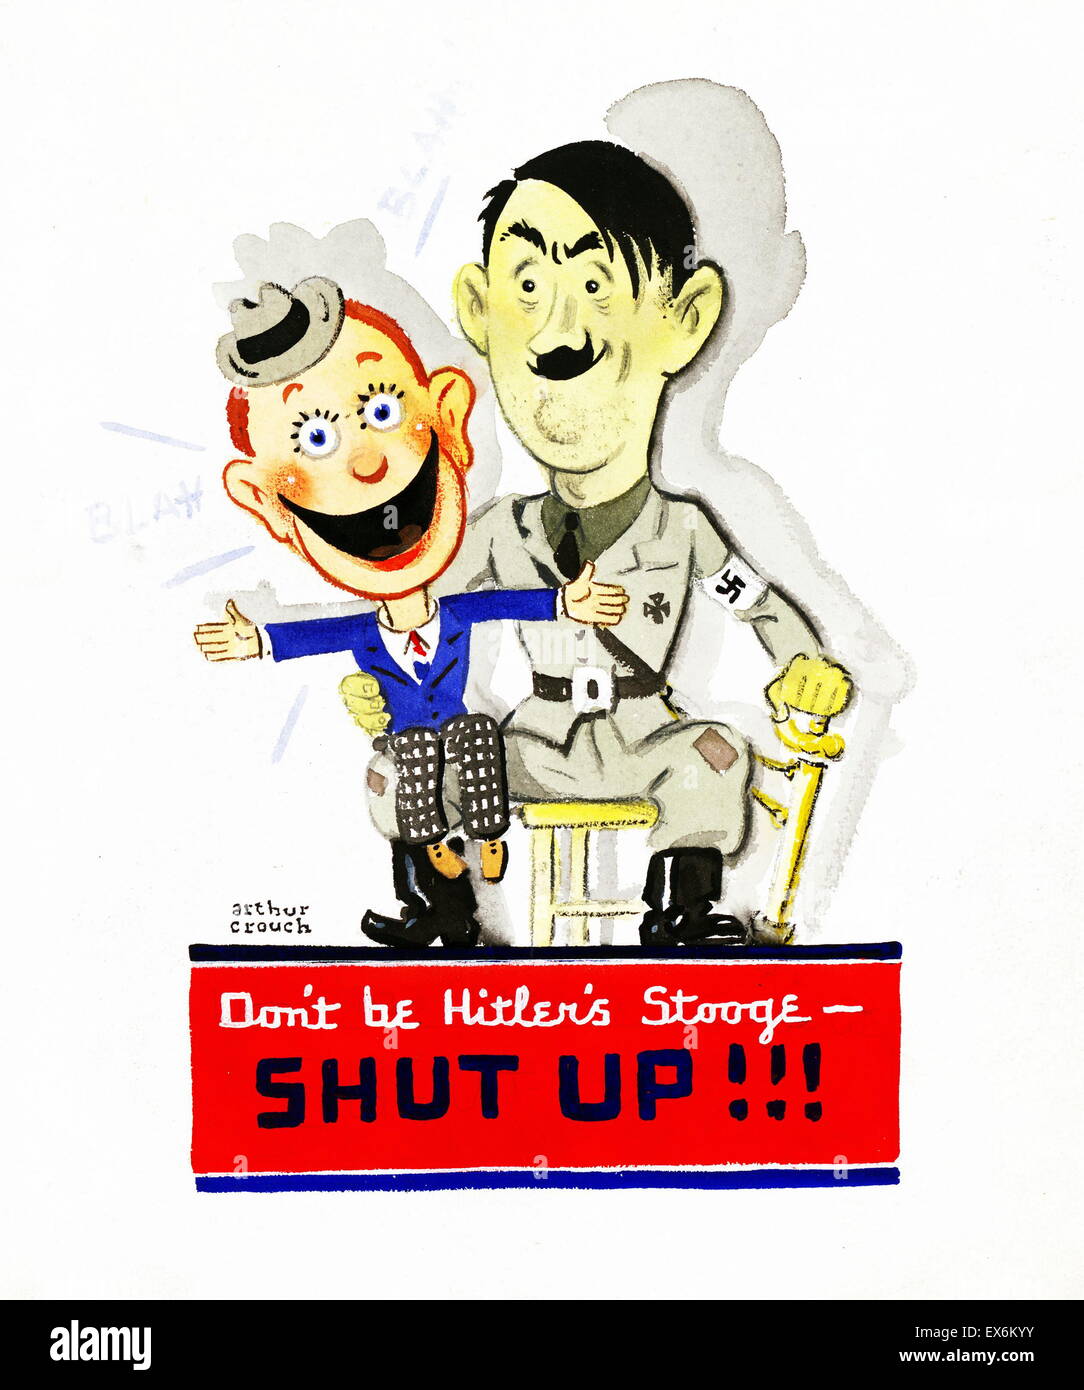 World War Two American propaganda poster US Army 1942. 'don't be Hitler's stooge- Shut Up!!' Stock Photo